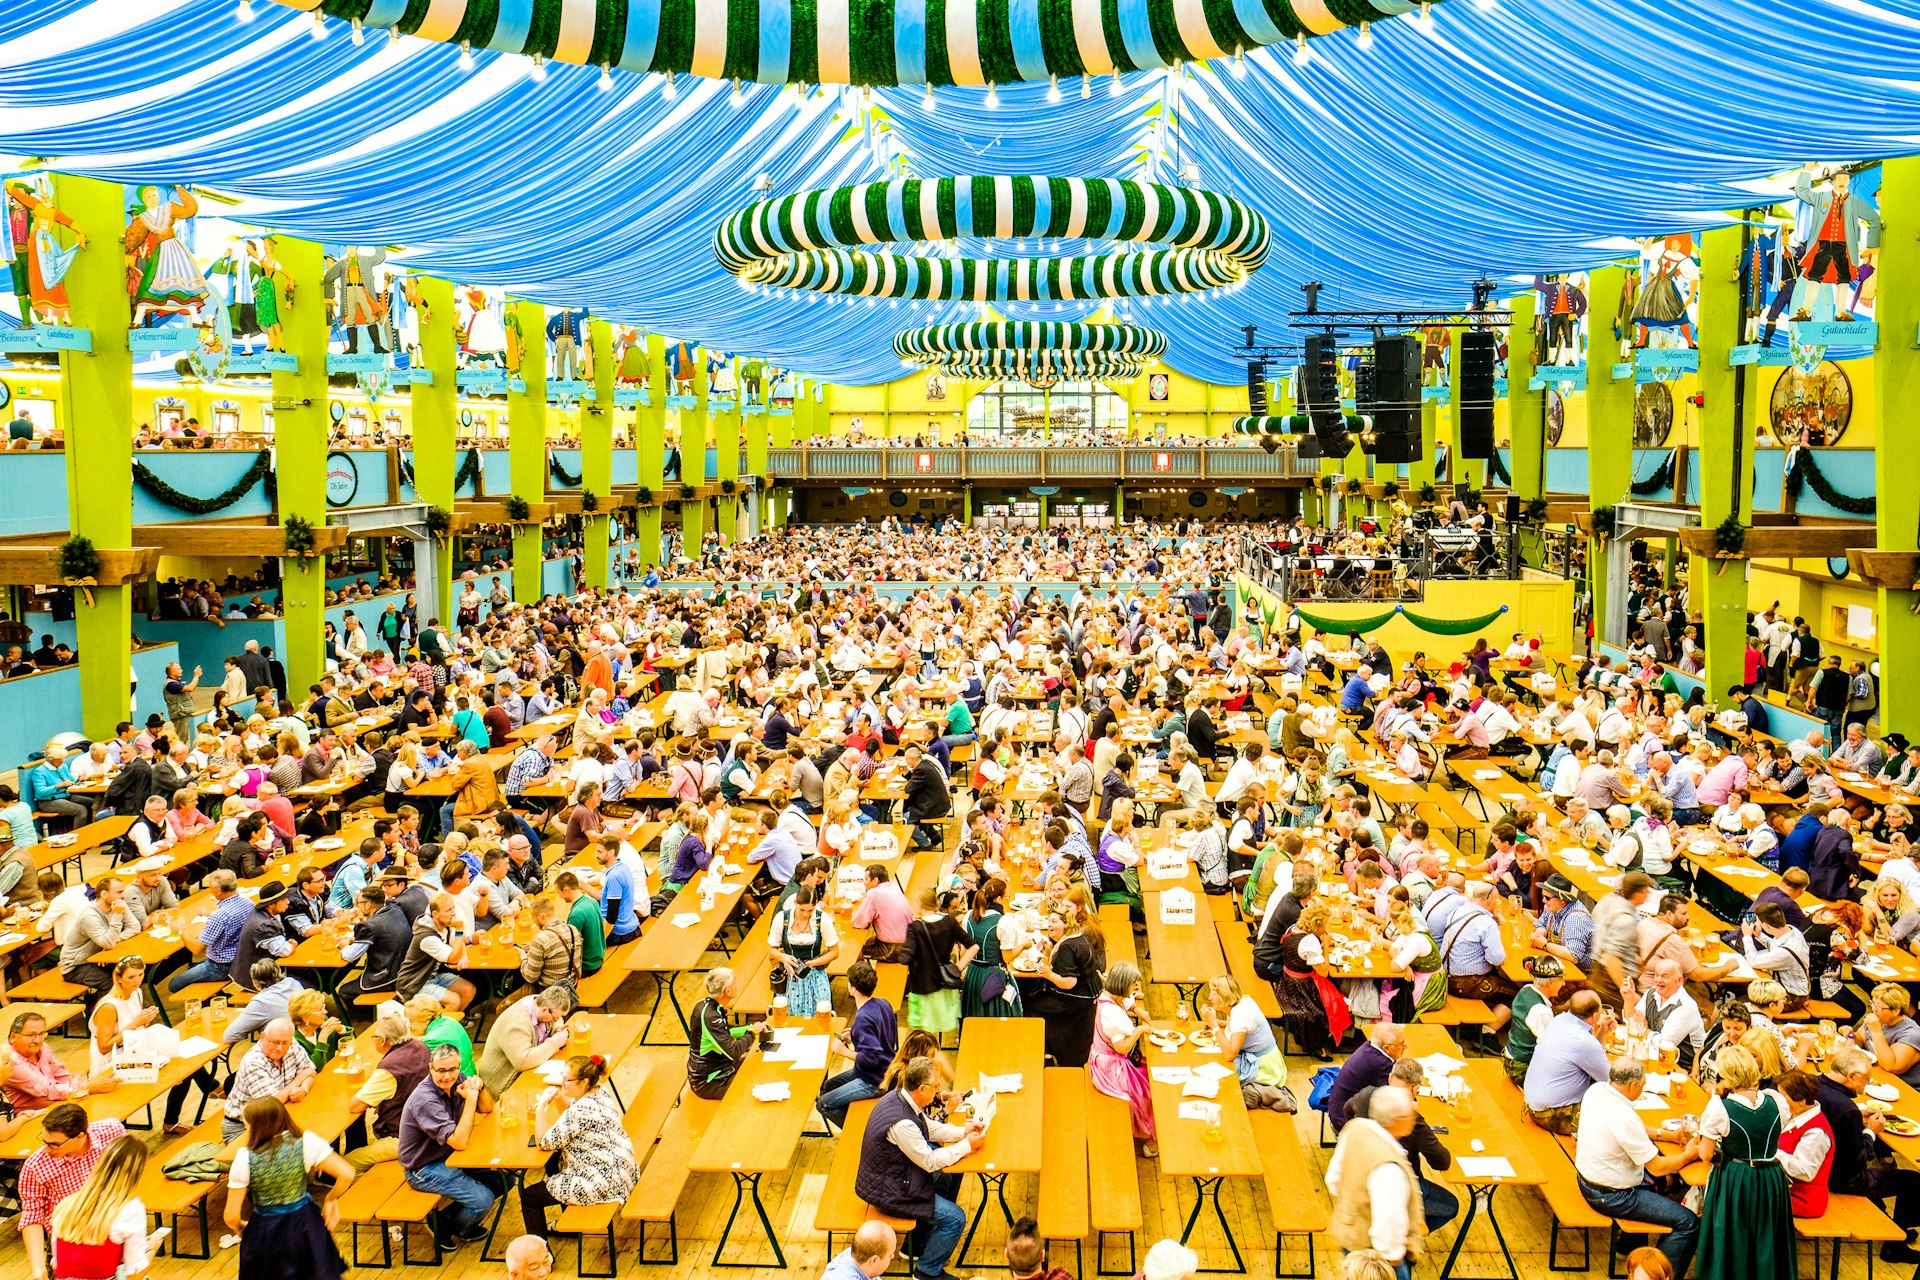 Crowds gather under festive streamers in the Spaten-beer tent in Theresienwiese for Oktoberfest, Munich